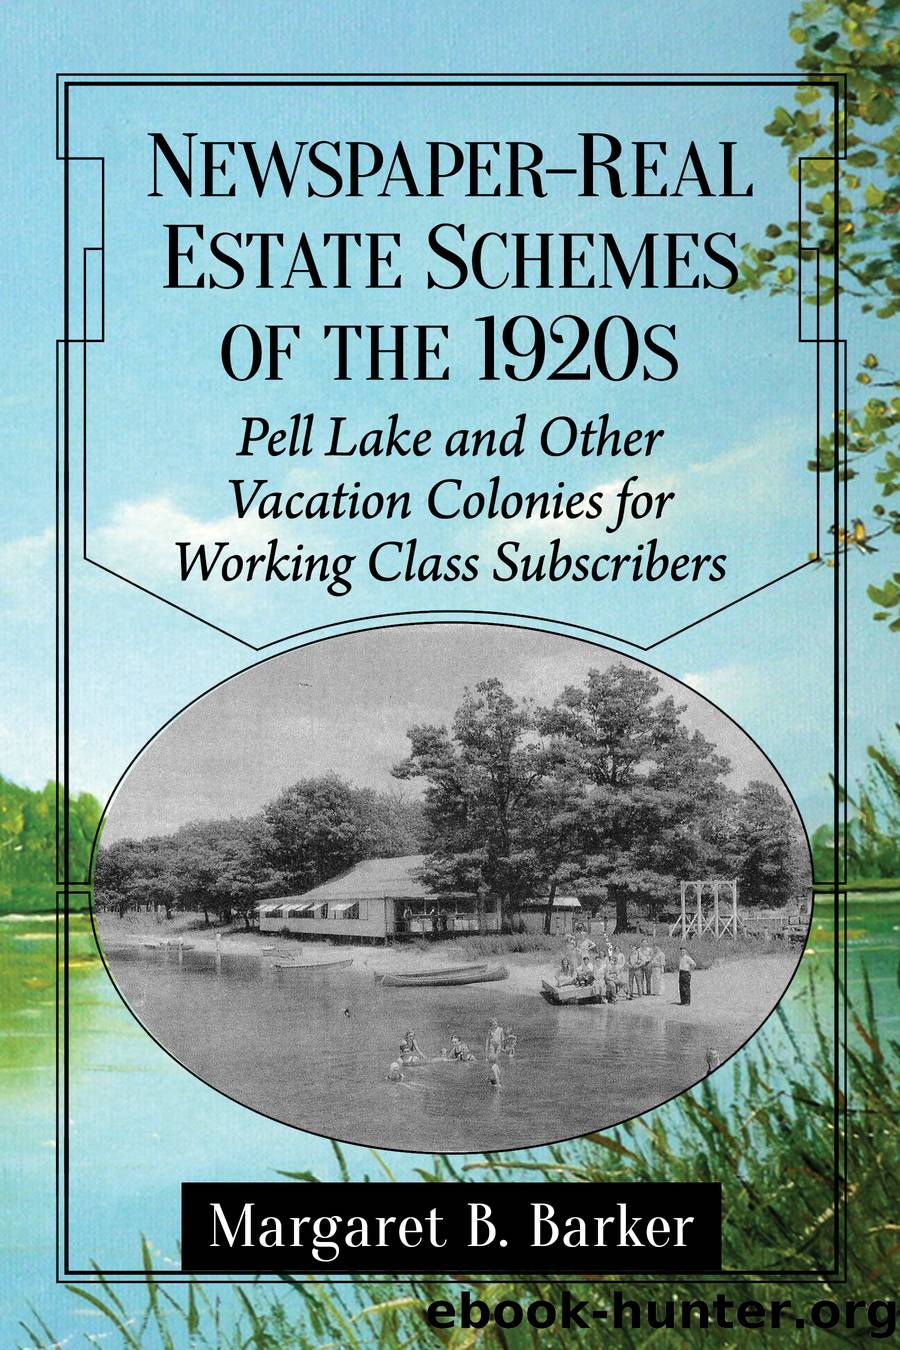 Newspaper-Real Estate Schemes of the 1920s by Margaret B. Barker